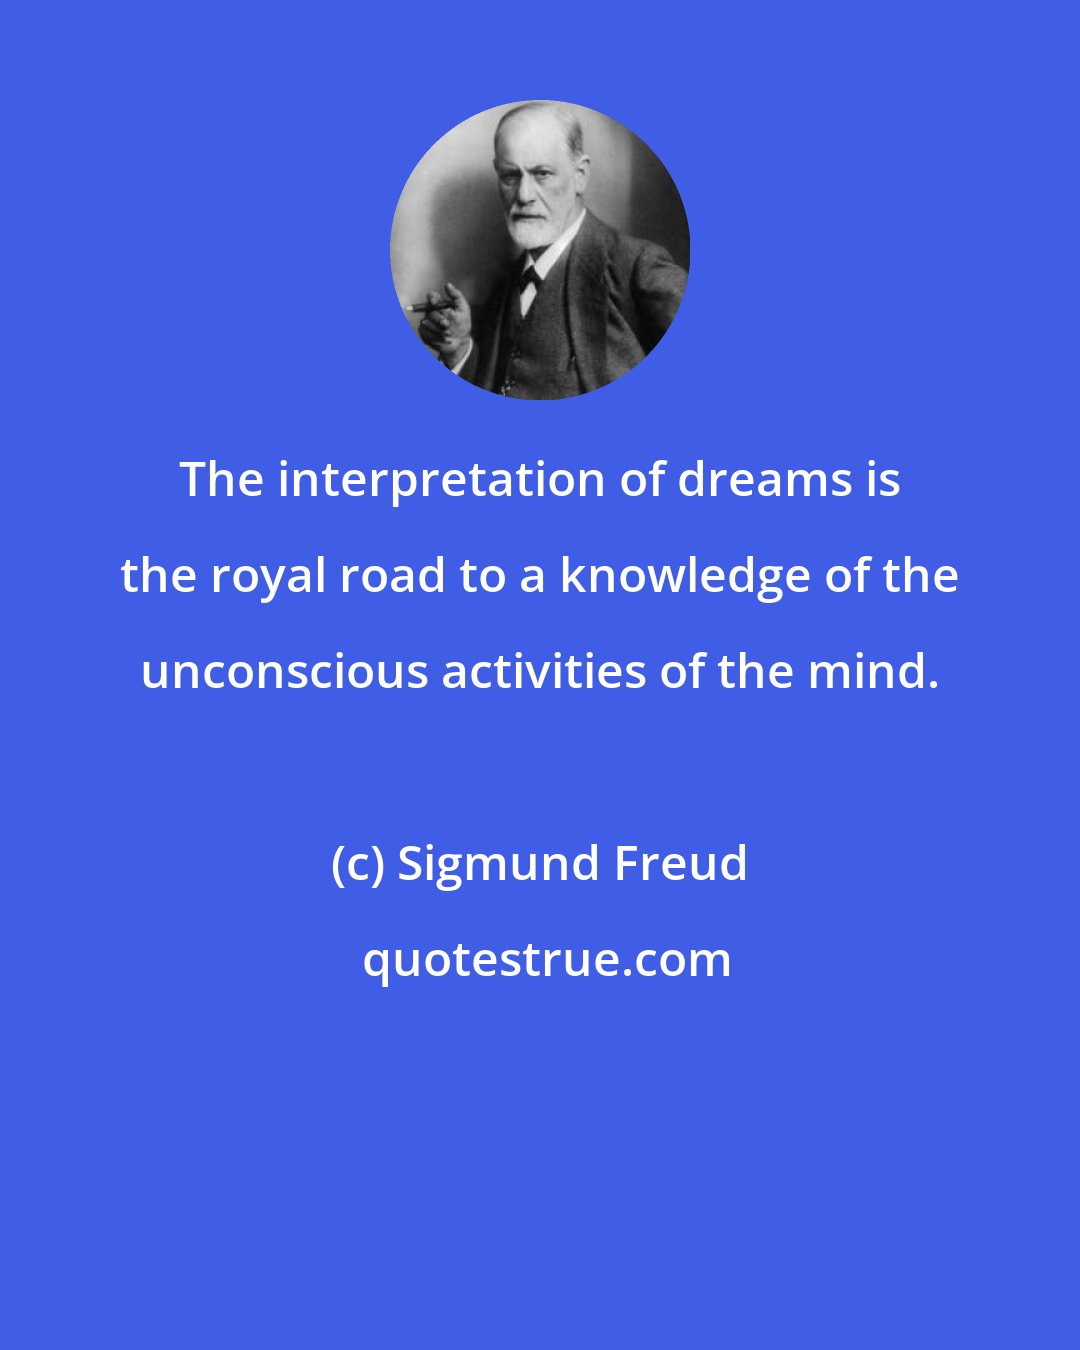 Sigmund Freud: The interpretation of dreams is the royal road to a knowledge of the unconscious activities of the mind.